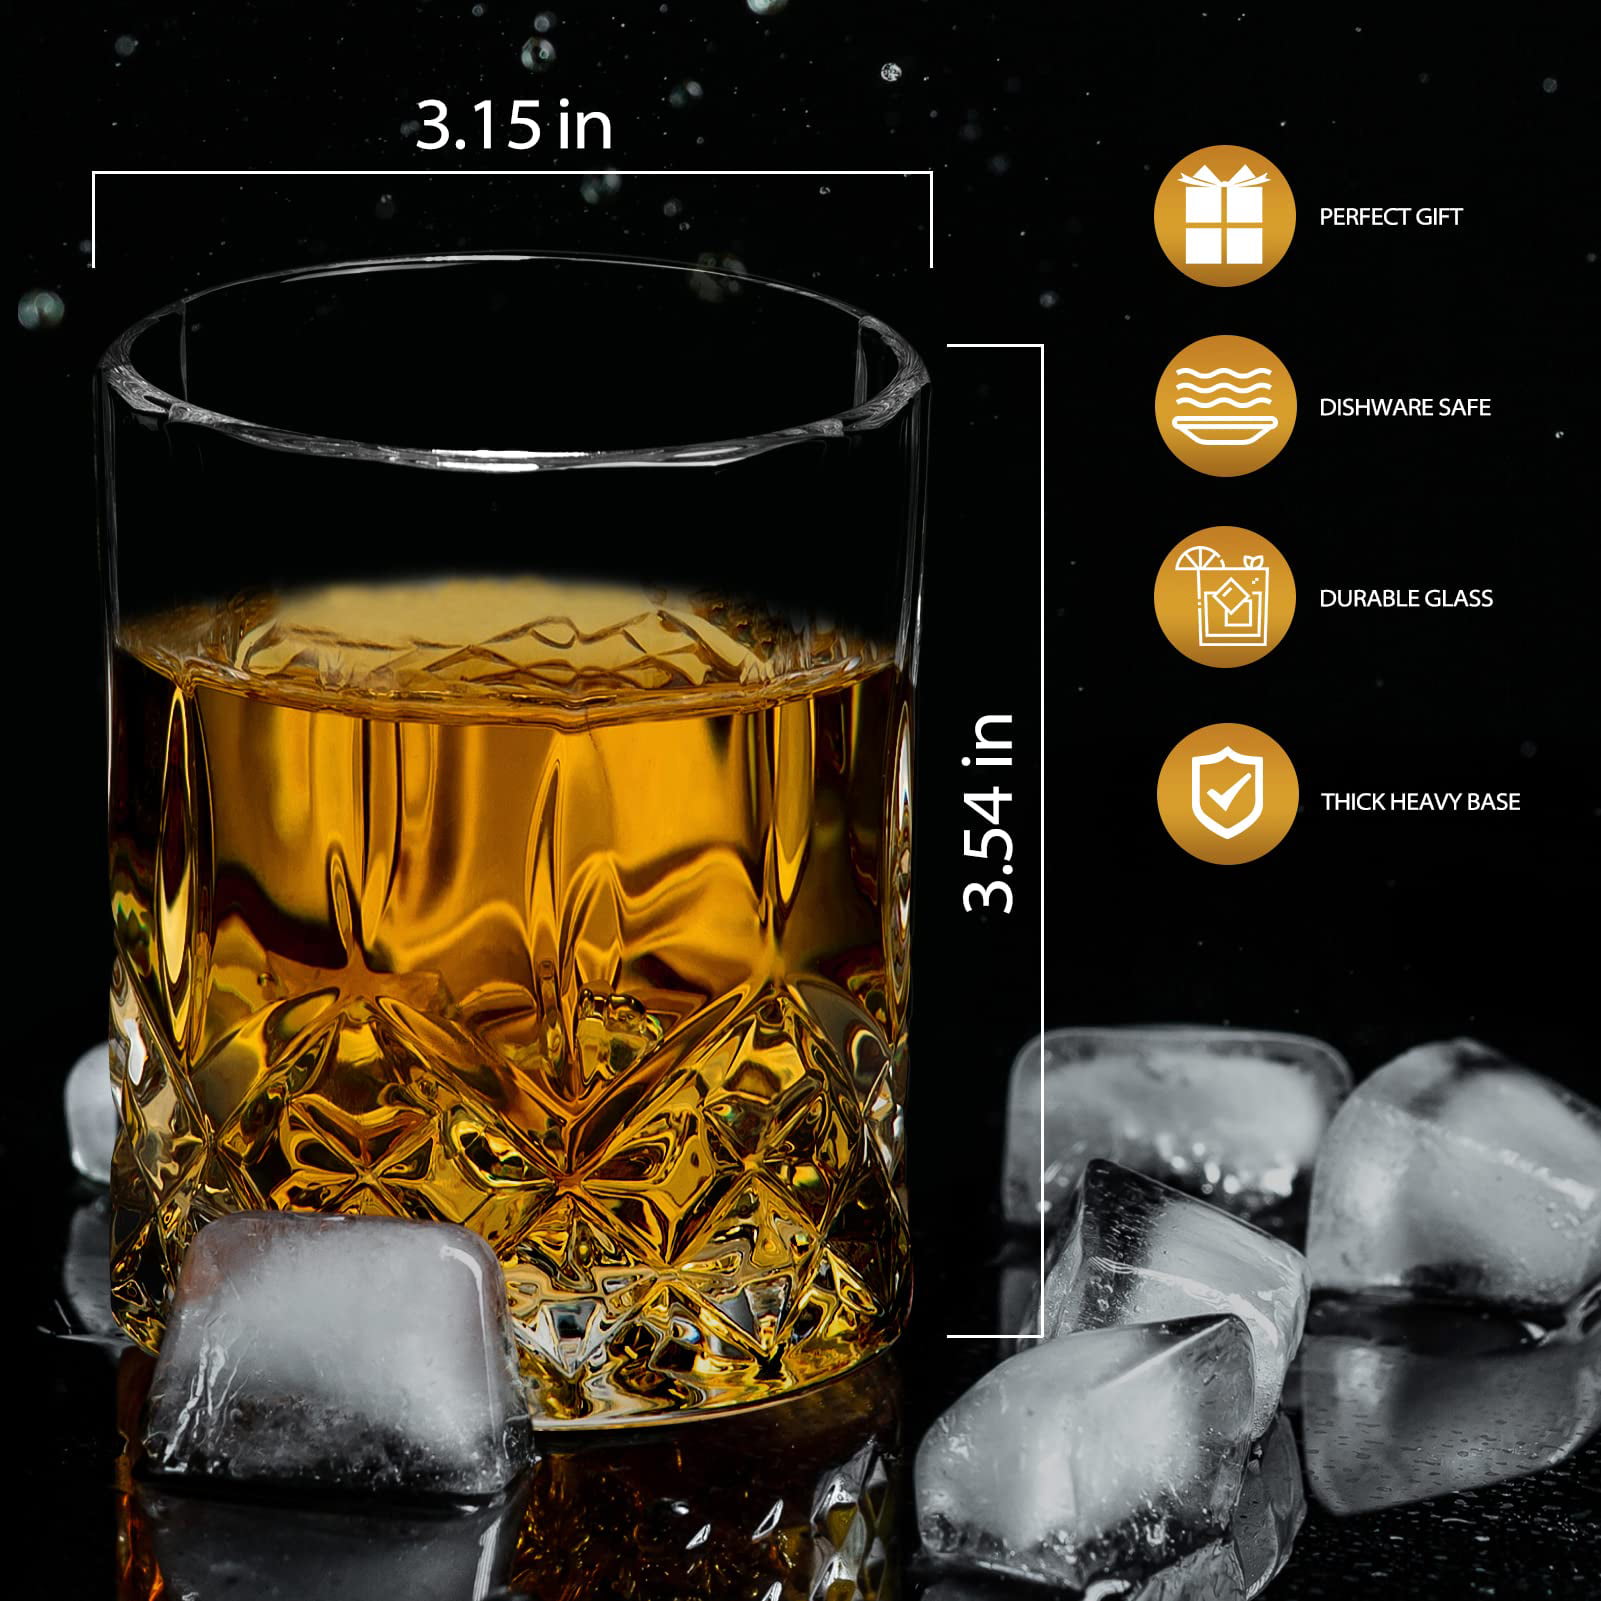 Square Drinking Whiskey Glasses Set of 4, Old Fashioned Glass Cup Bar Set, Stemless Everyday Rocks Whisky Glass Best Present for Men, Scotch